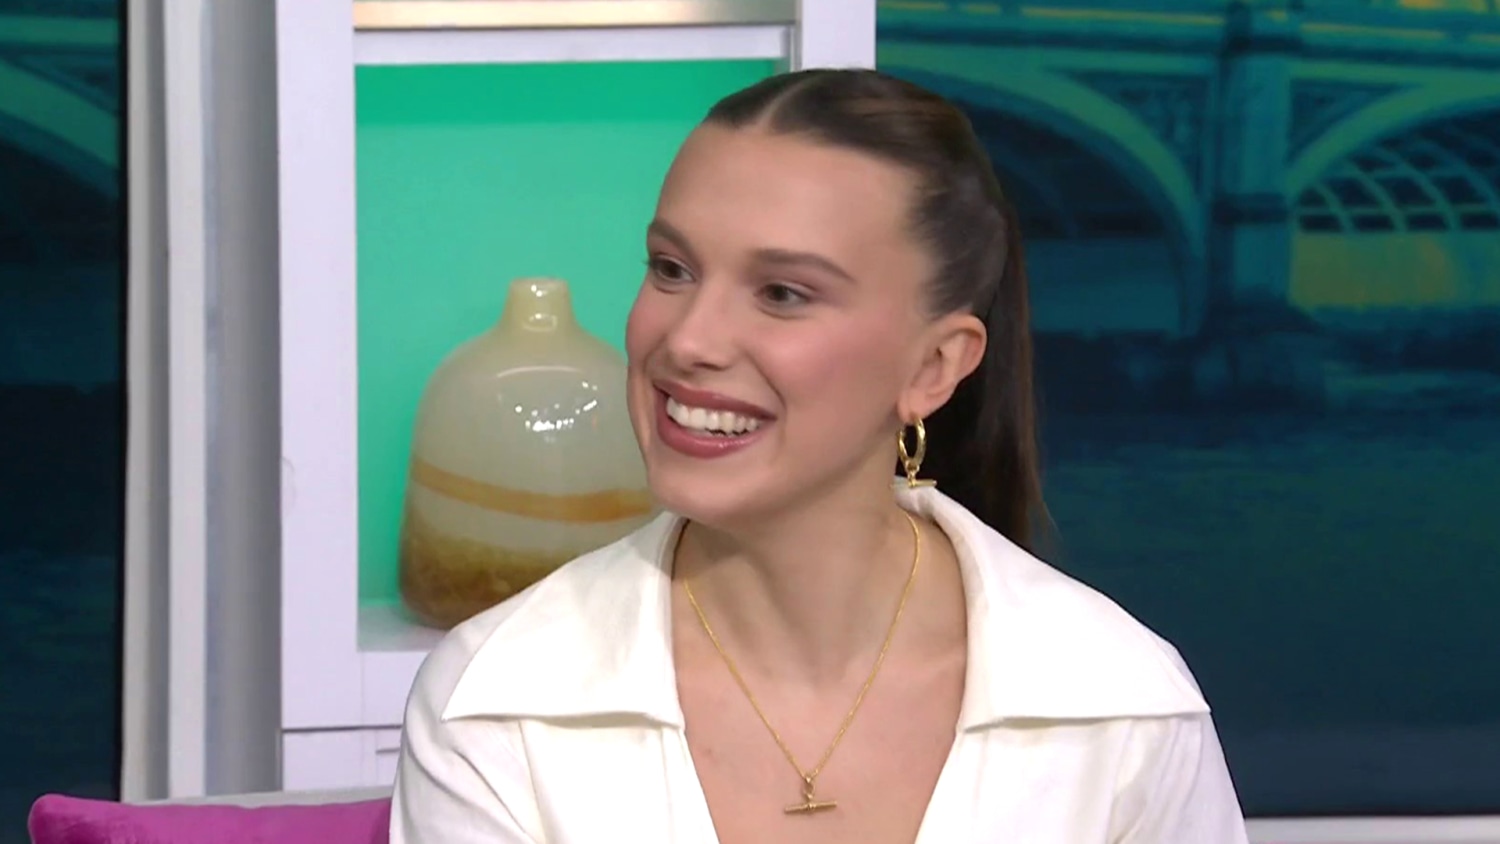 Millie Bobby Brown opens up about her wedding plans to Jake Bongiovi